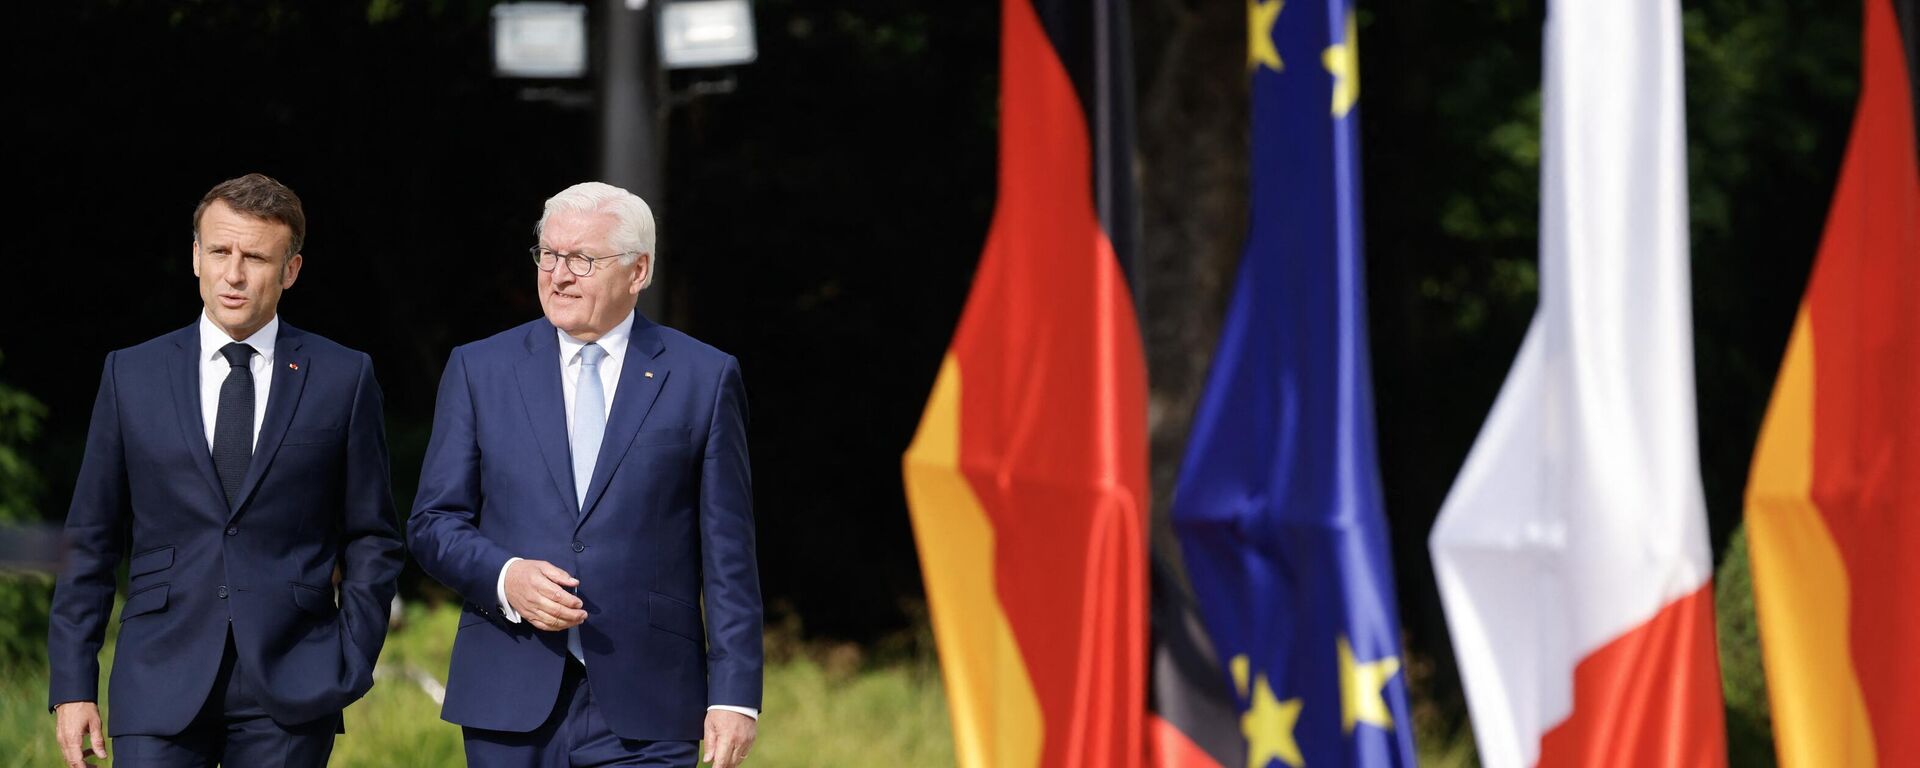 French President Emmanuel Macron (L) and German President Frank-Walter Steinmeier review a military honor guard during a welcome ceremony at Bellevue presidential palace in Berlin, Germany on May 26, 2024. - Sputnik International, 1920, 26.05.2024